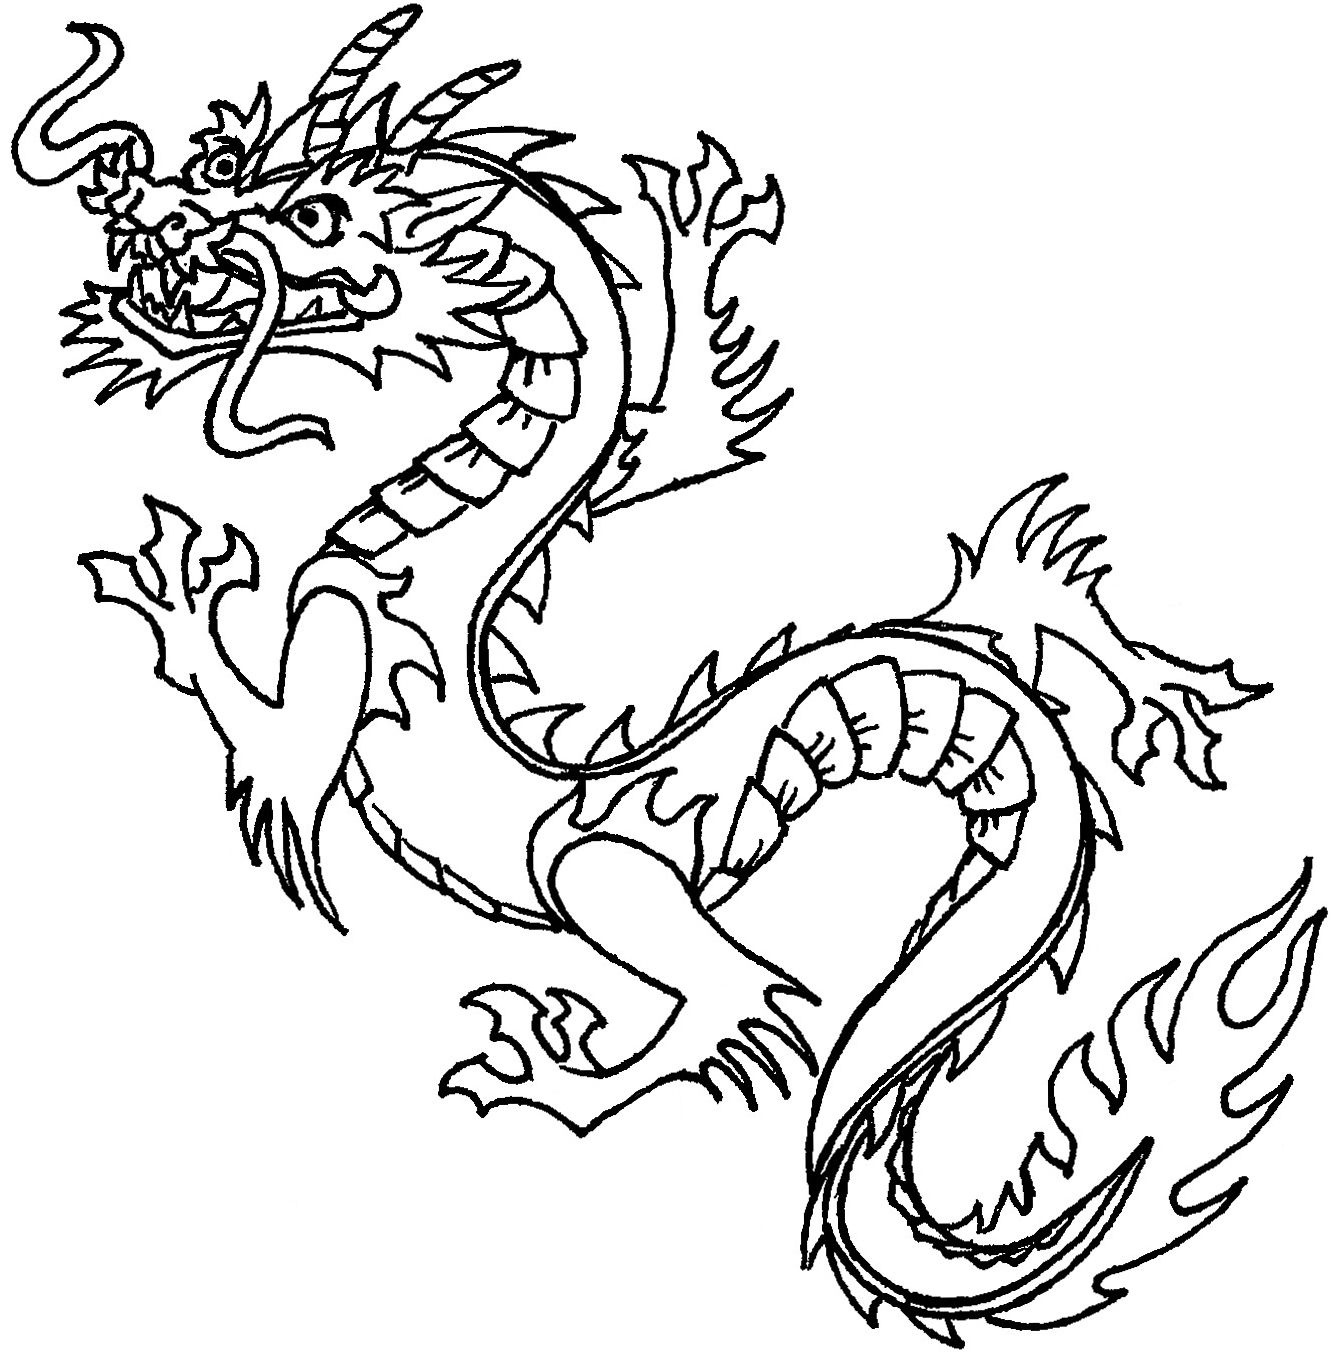 Free Printable Chinese Dragon Coloring Pages For Kids | Stencils - Free Printable Dragon Stencils